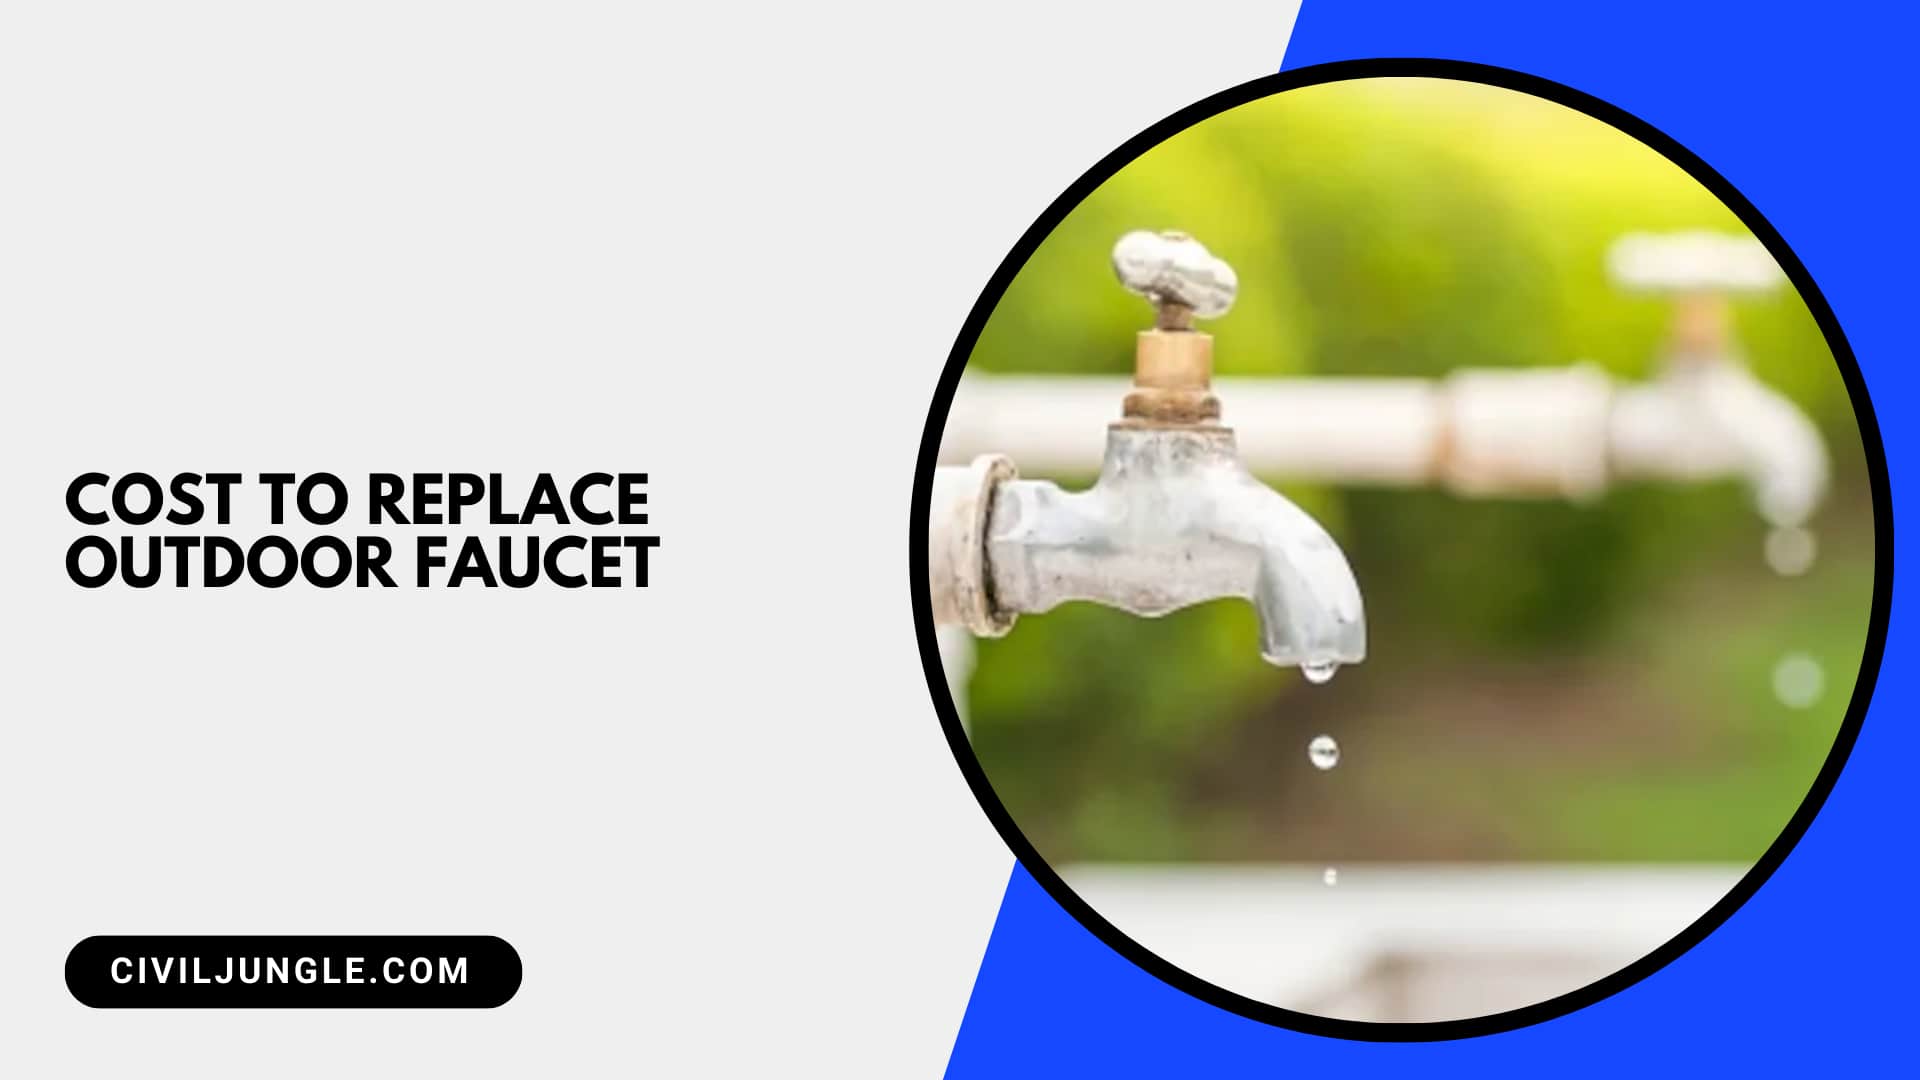 Cost to Replace Outdoor Faucet